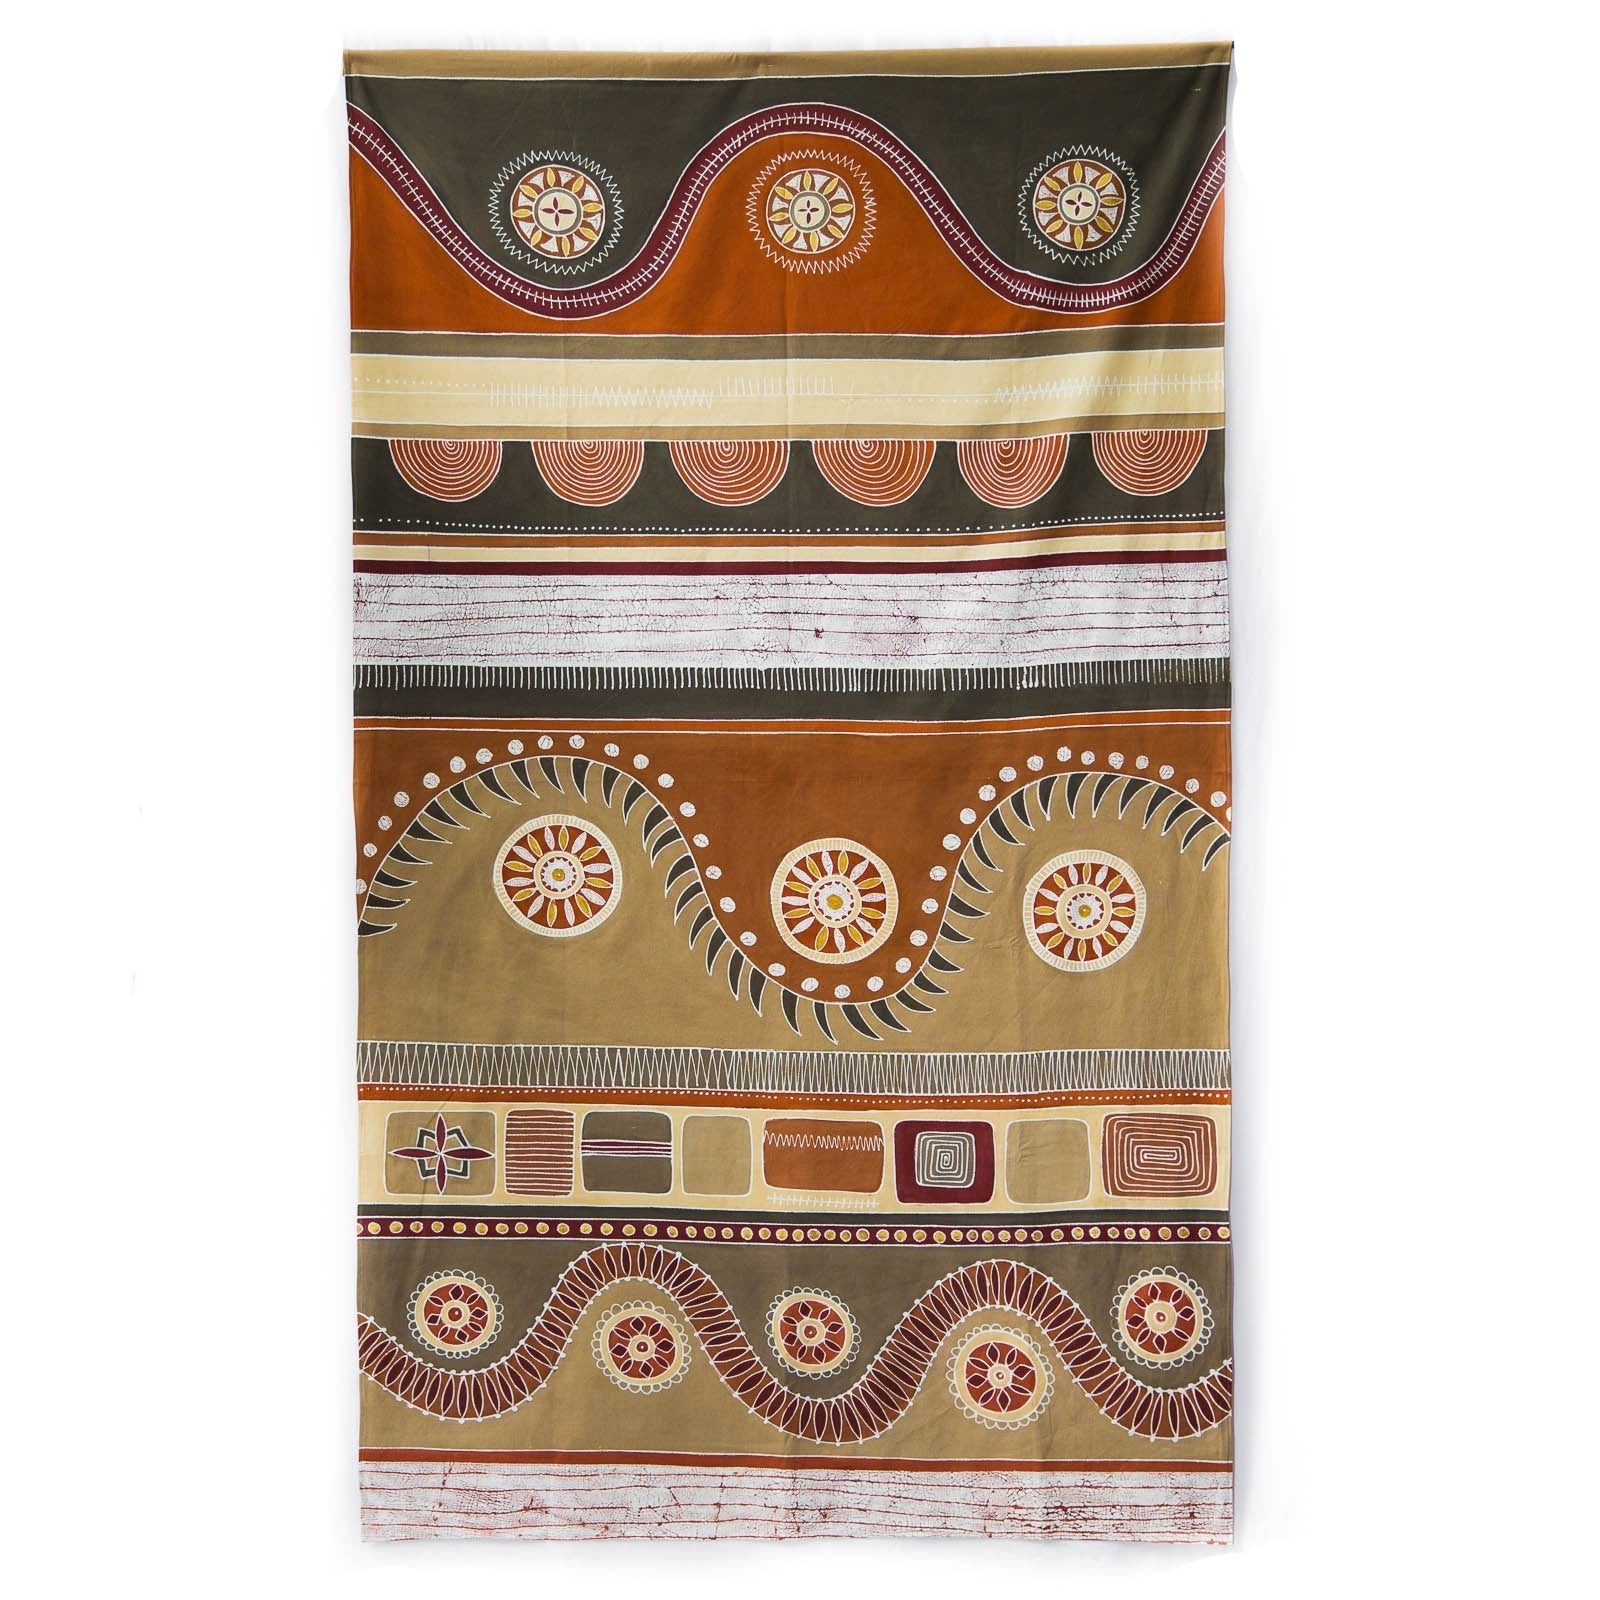 Mali Sienna Tablecloth - Handmade by TRIBAL TEXTILES - Handcrafted Home Decor Interiors - African Made